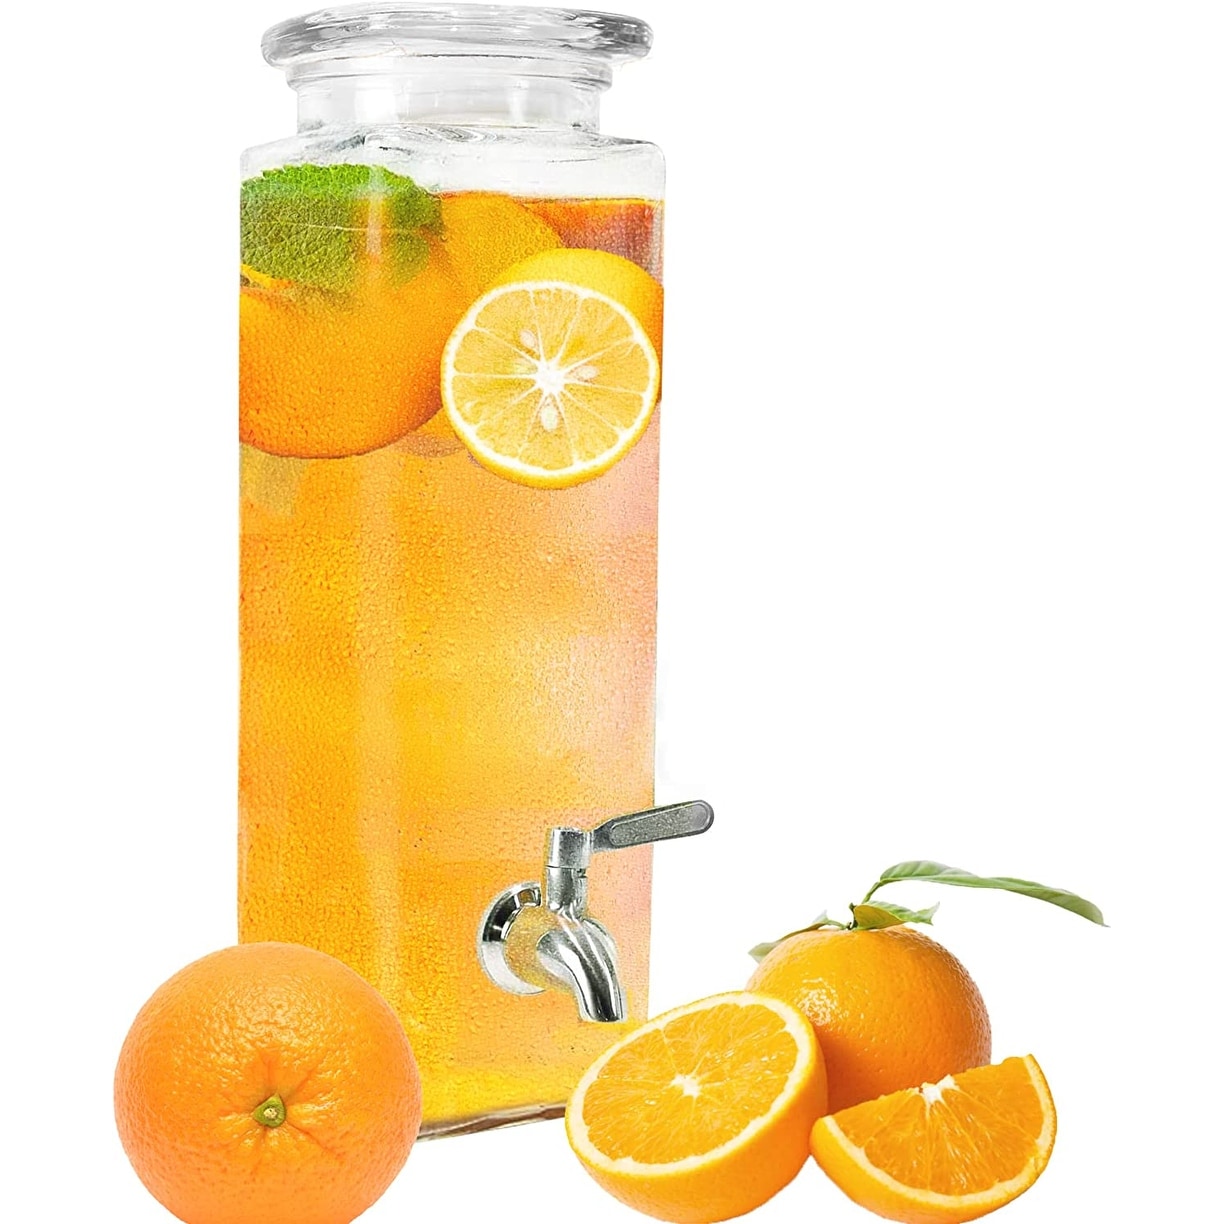 https://ak1.ostkcdn.com/images/products/is/images/direct/77a764cf0564ee49f3388beeae38149661aabfaf/Tall-Square-Glass-Mason-Jar-Drink-Dispenser-With-Stainless-Steel-Spigot%2C-80-oz-%282.36-Liters%29.jpg